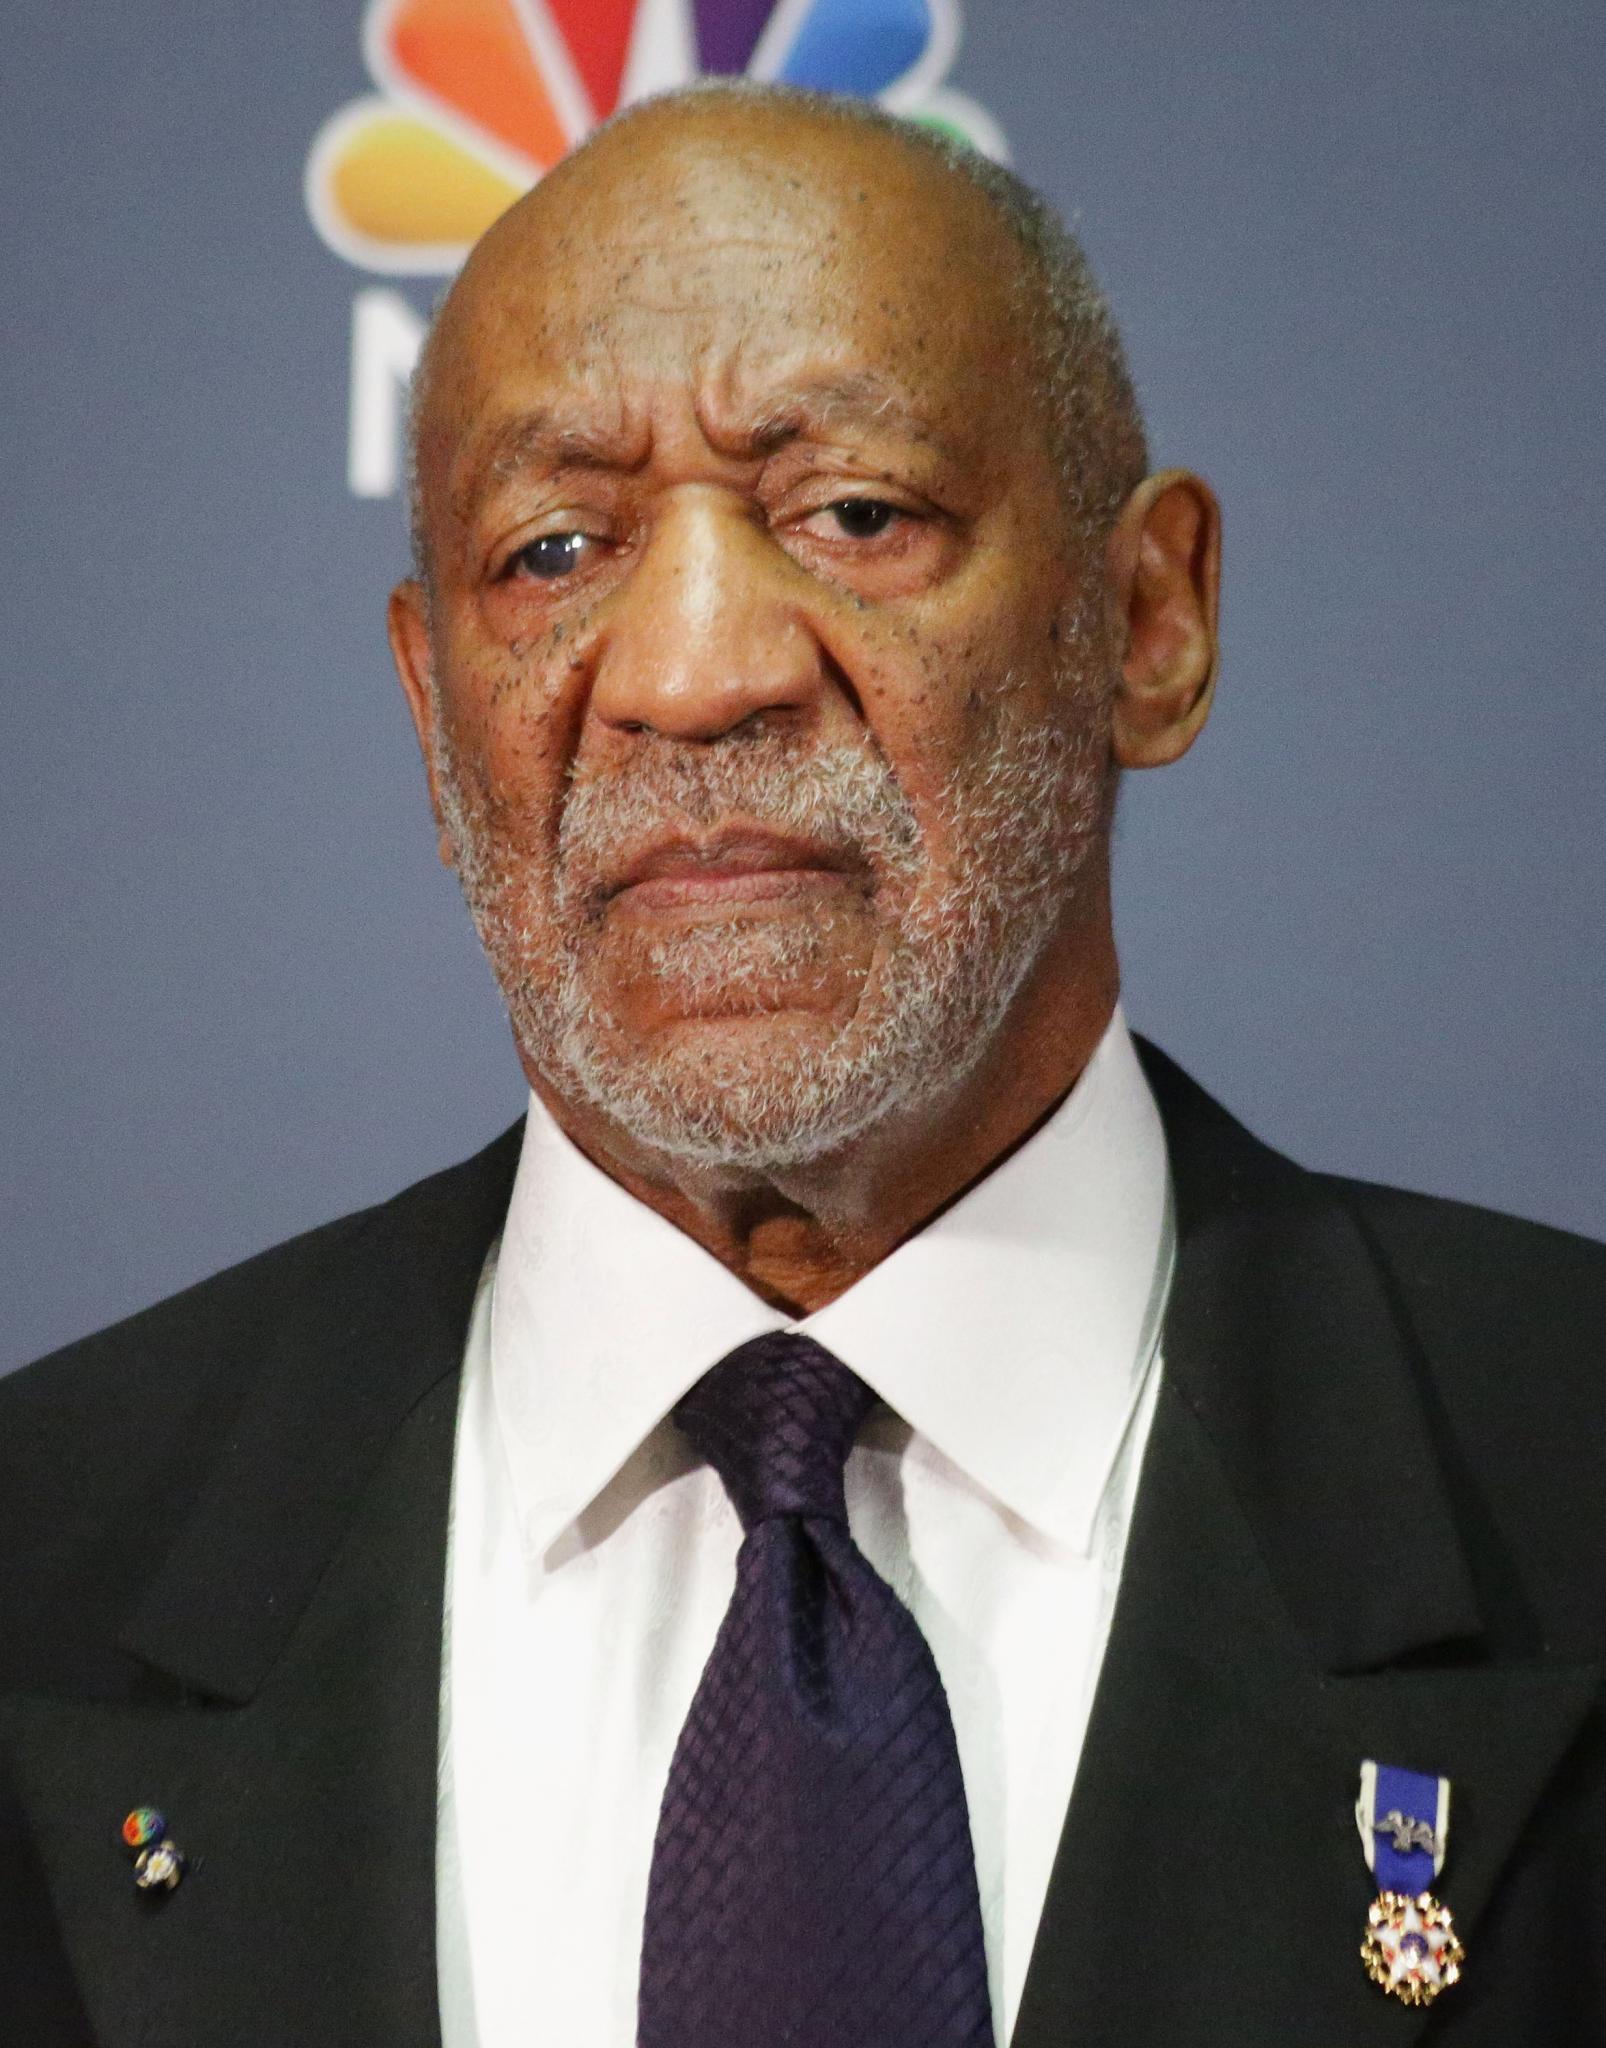 Bill Cosby’s Lawyers Claim He’s Legally Blind And Can’t Identify His Sexual Assault Accusers